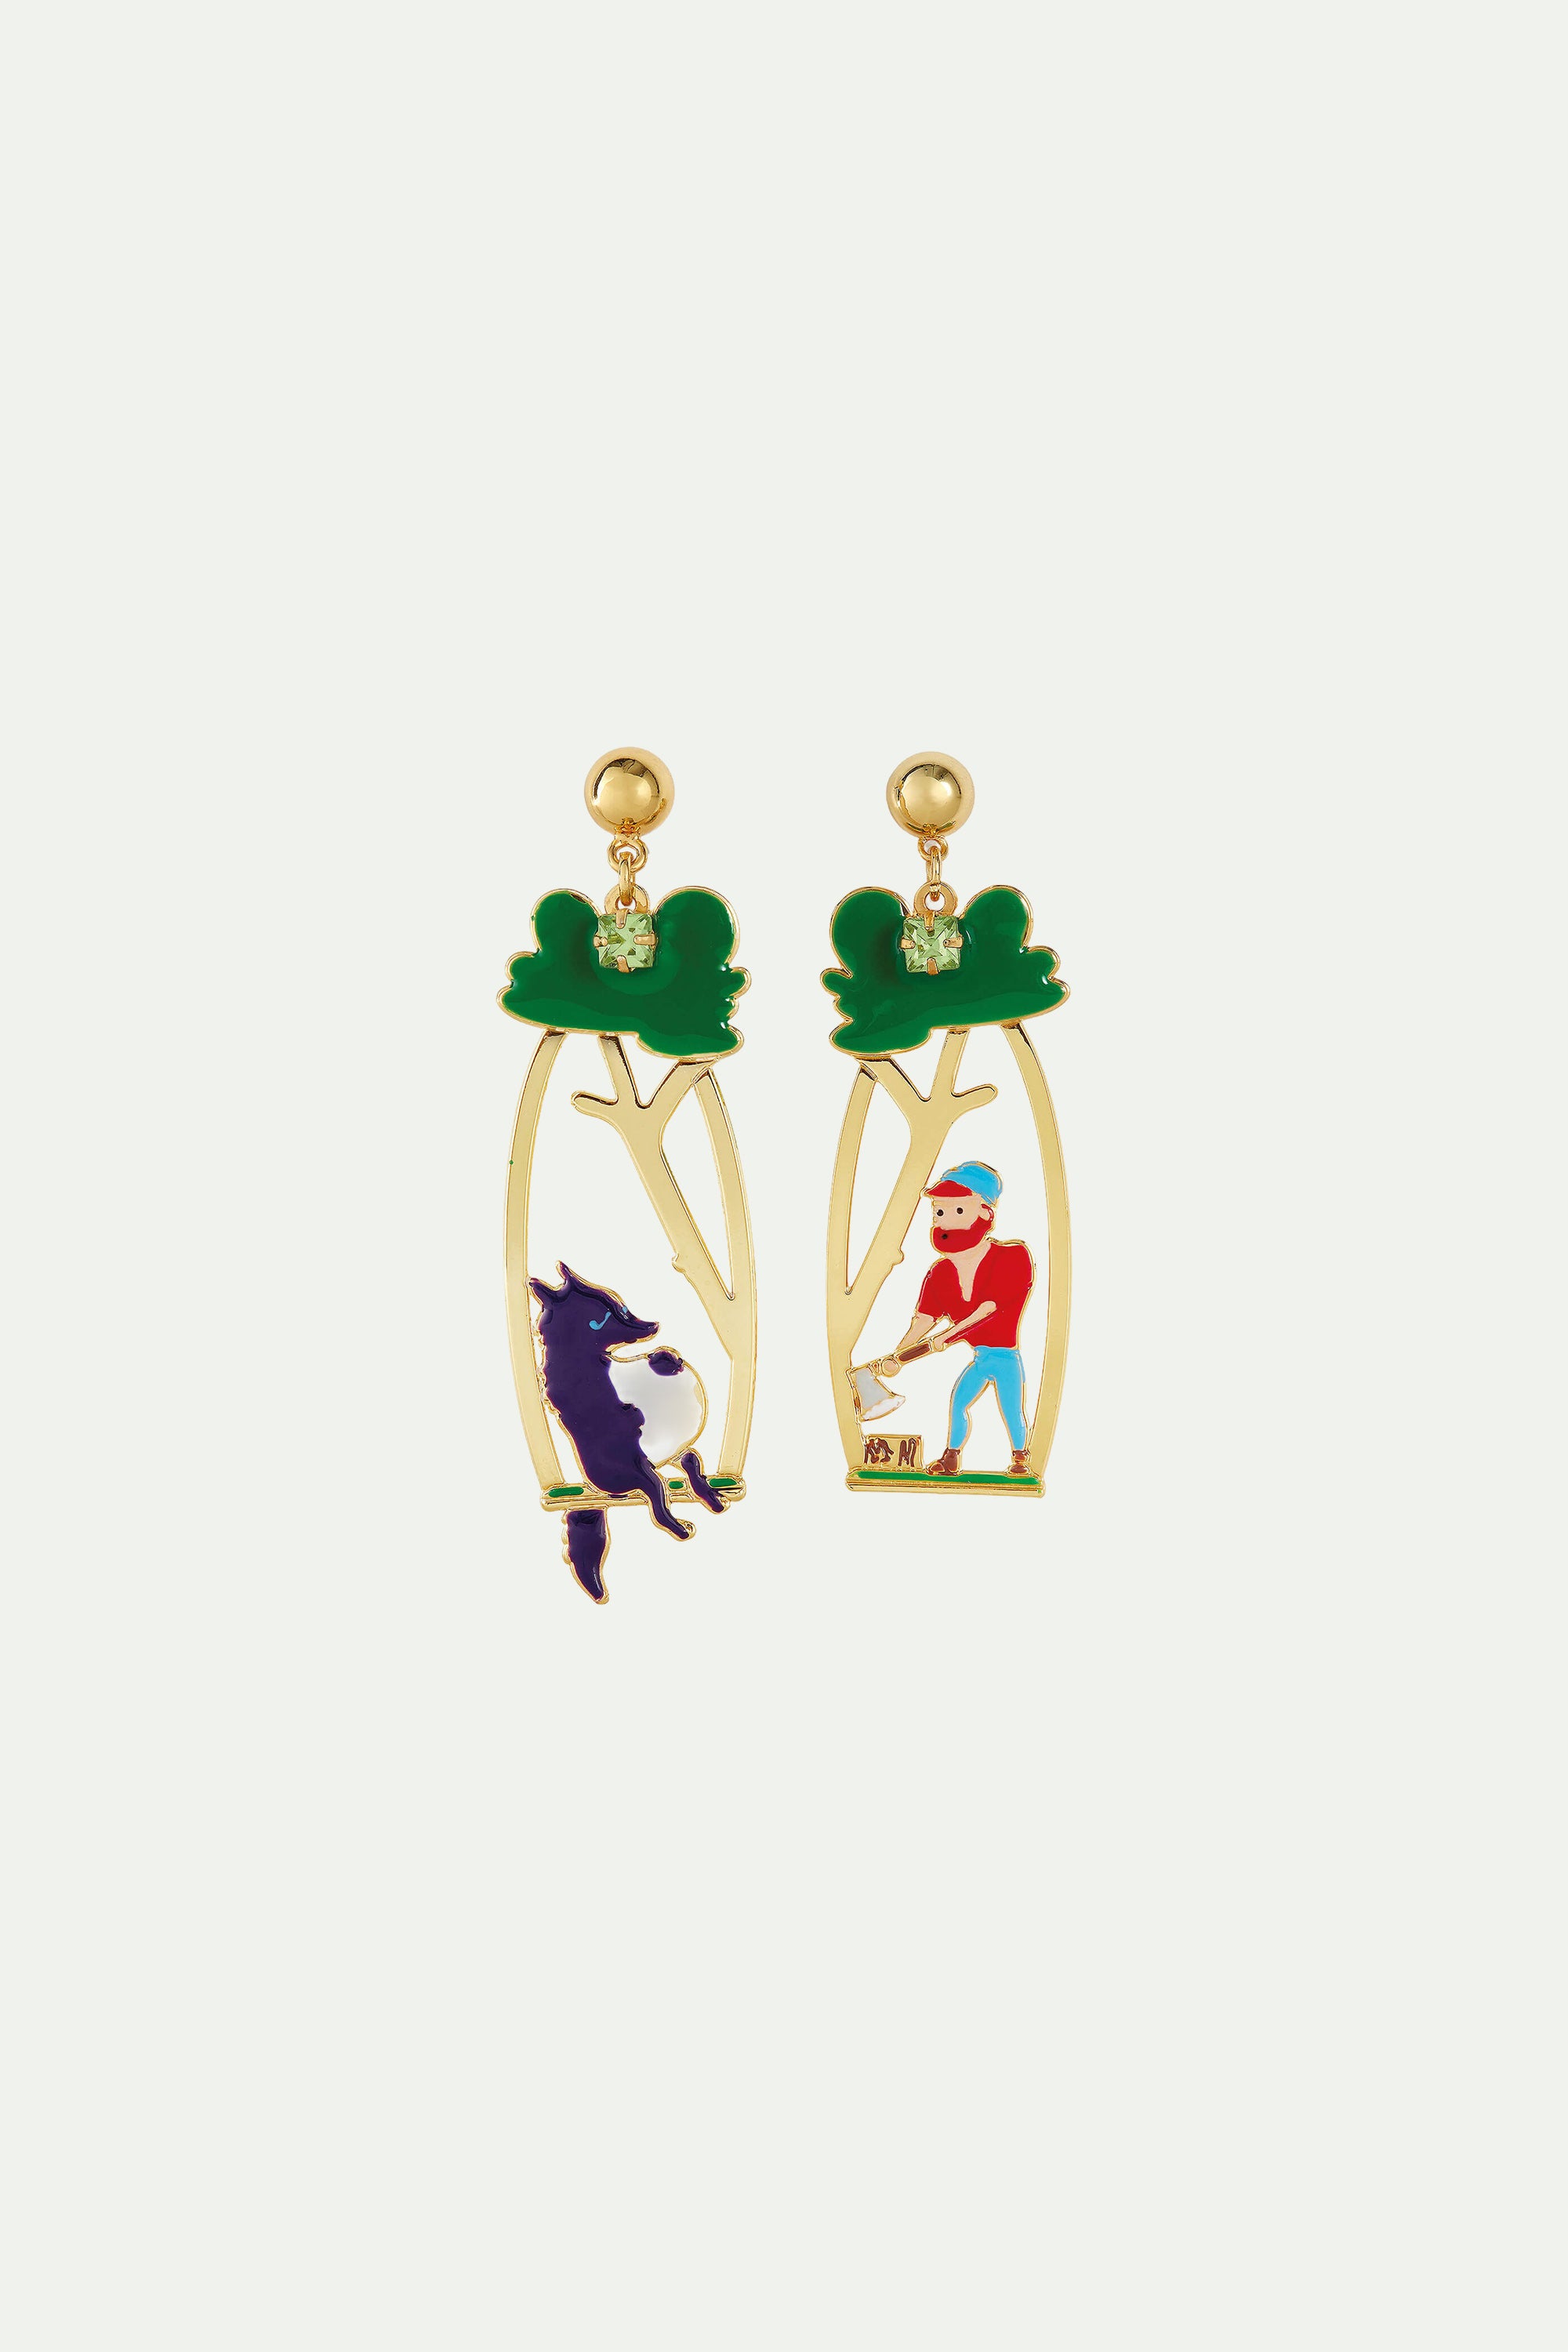 Woodsman and Big Bad Wolf clip-on earrings